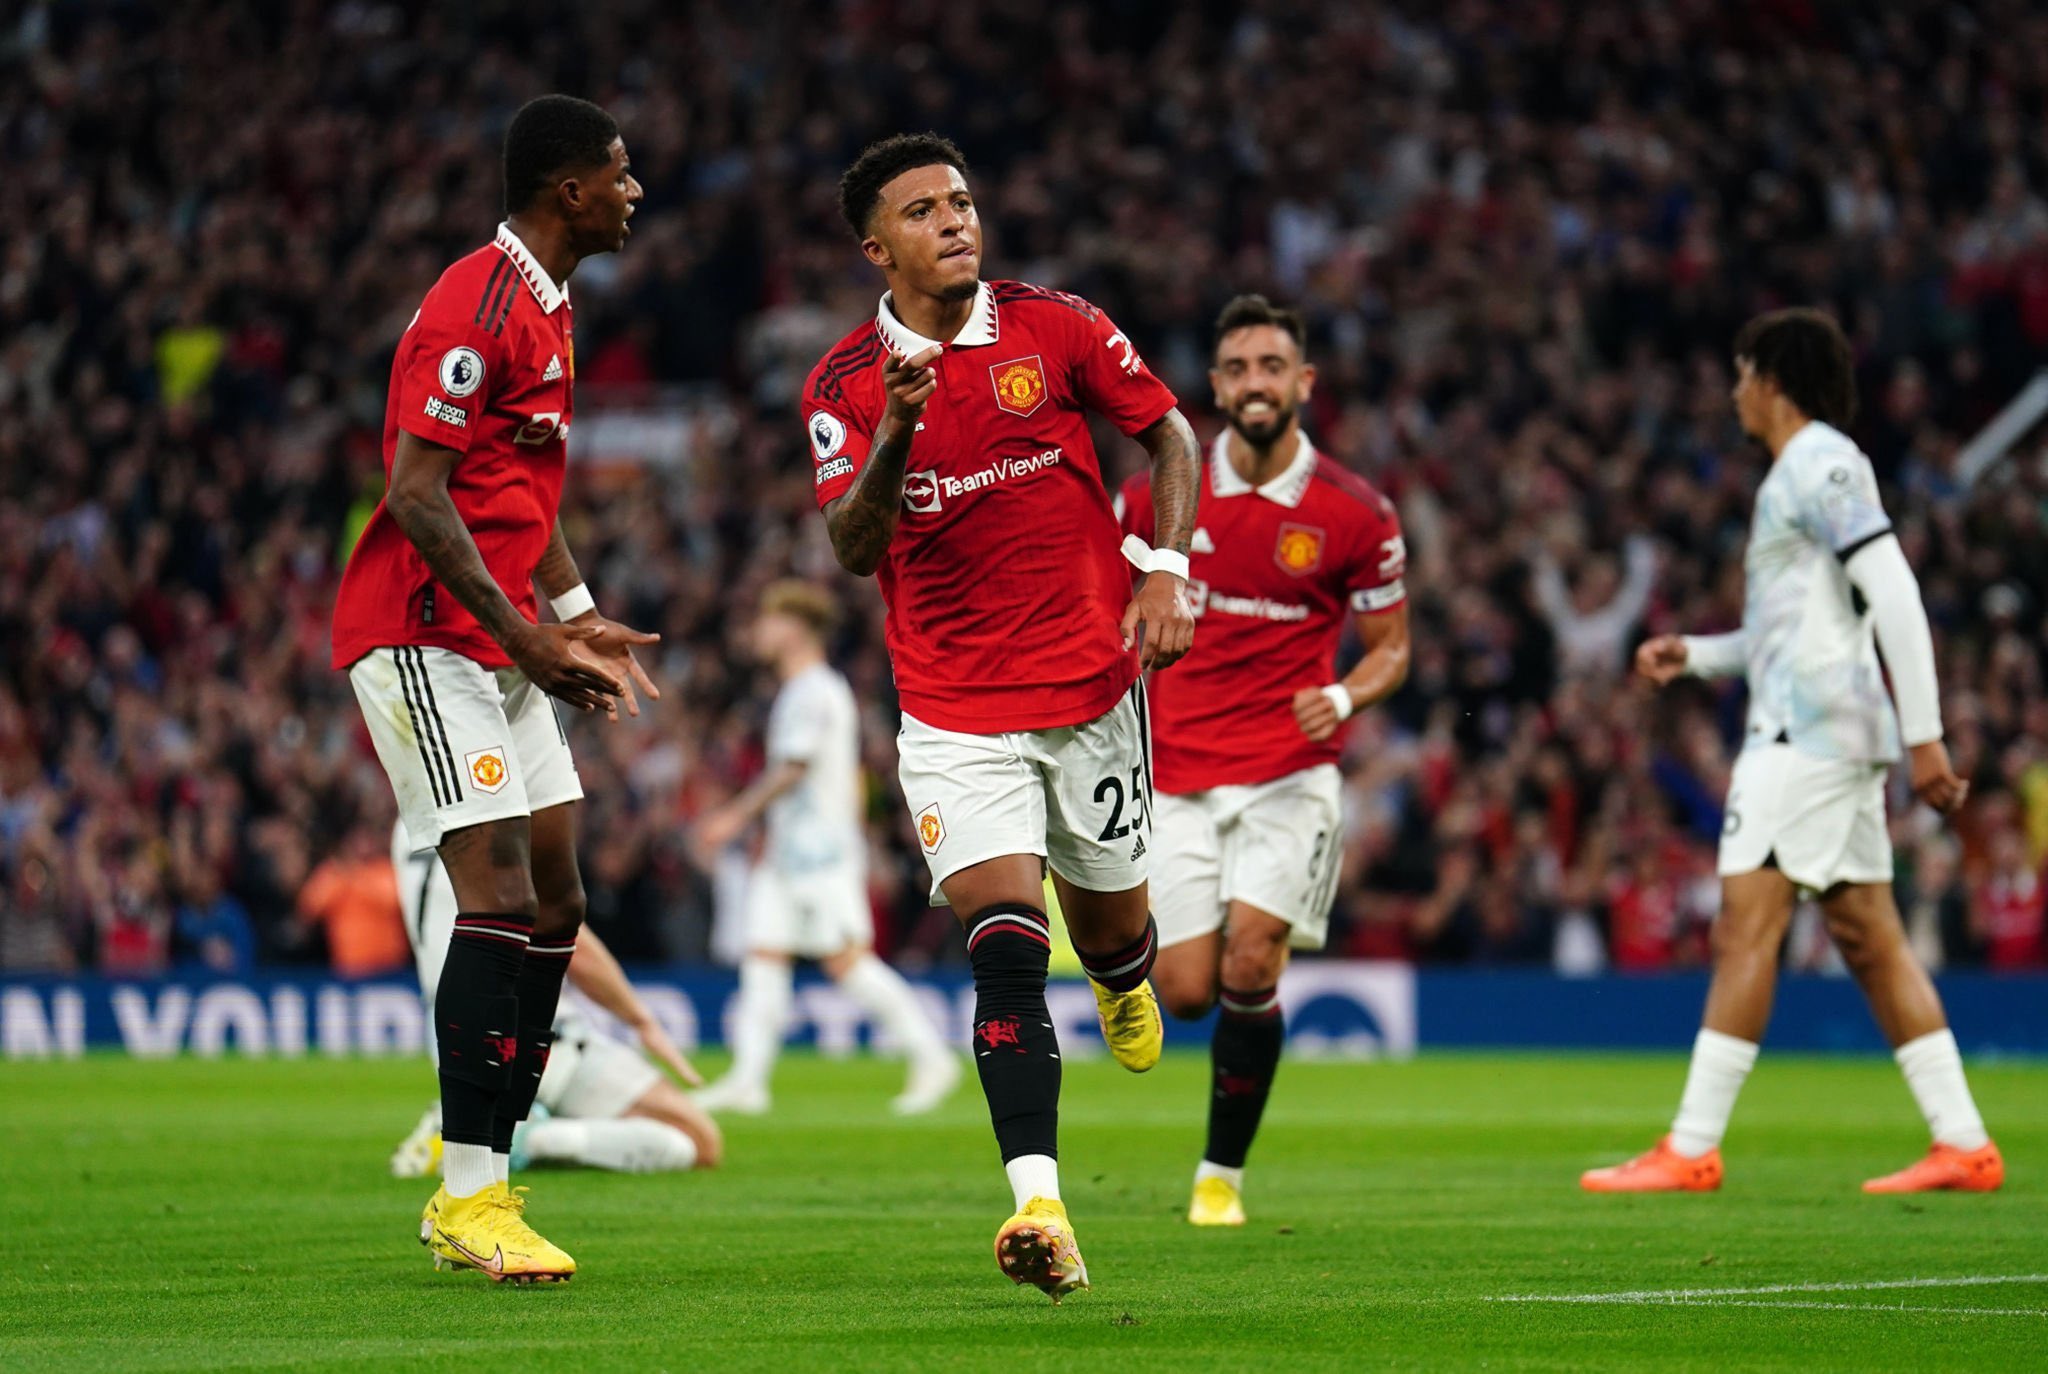 Jason Sancho opened the scoring for Manchester United